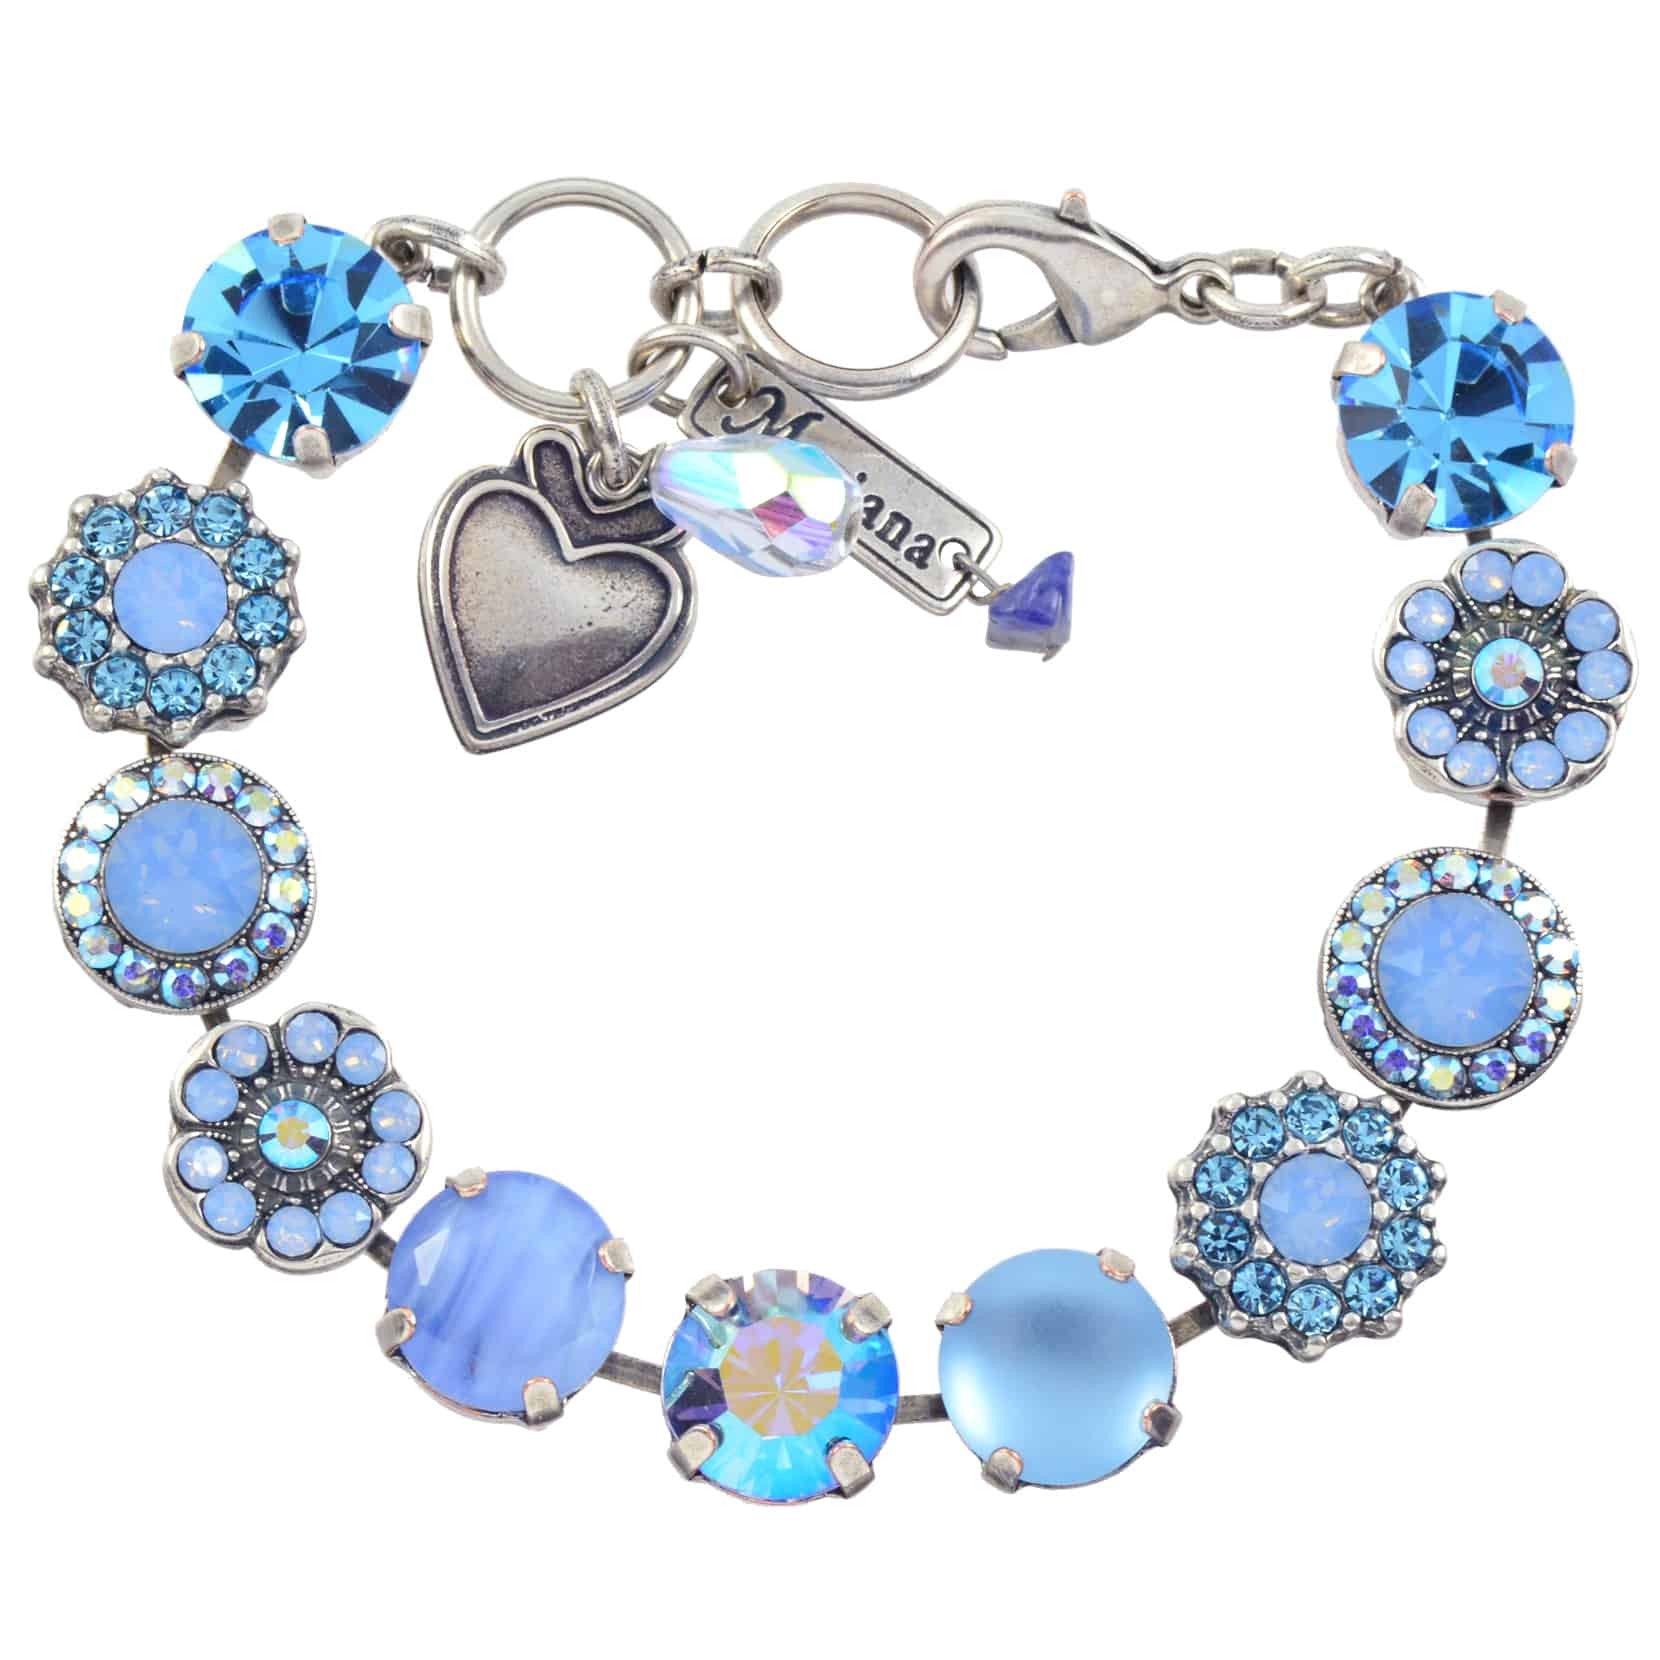 Mariana Jewelry Periwinkle Large Flower Design Tennis Bracelet, Silver Plated With Blue crystal, 8 4084 1343